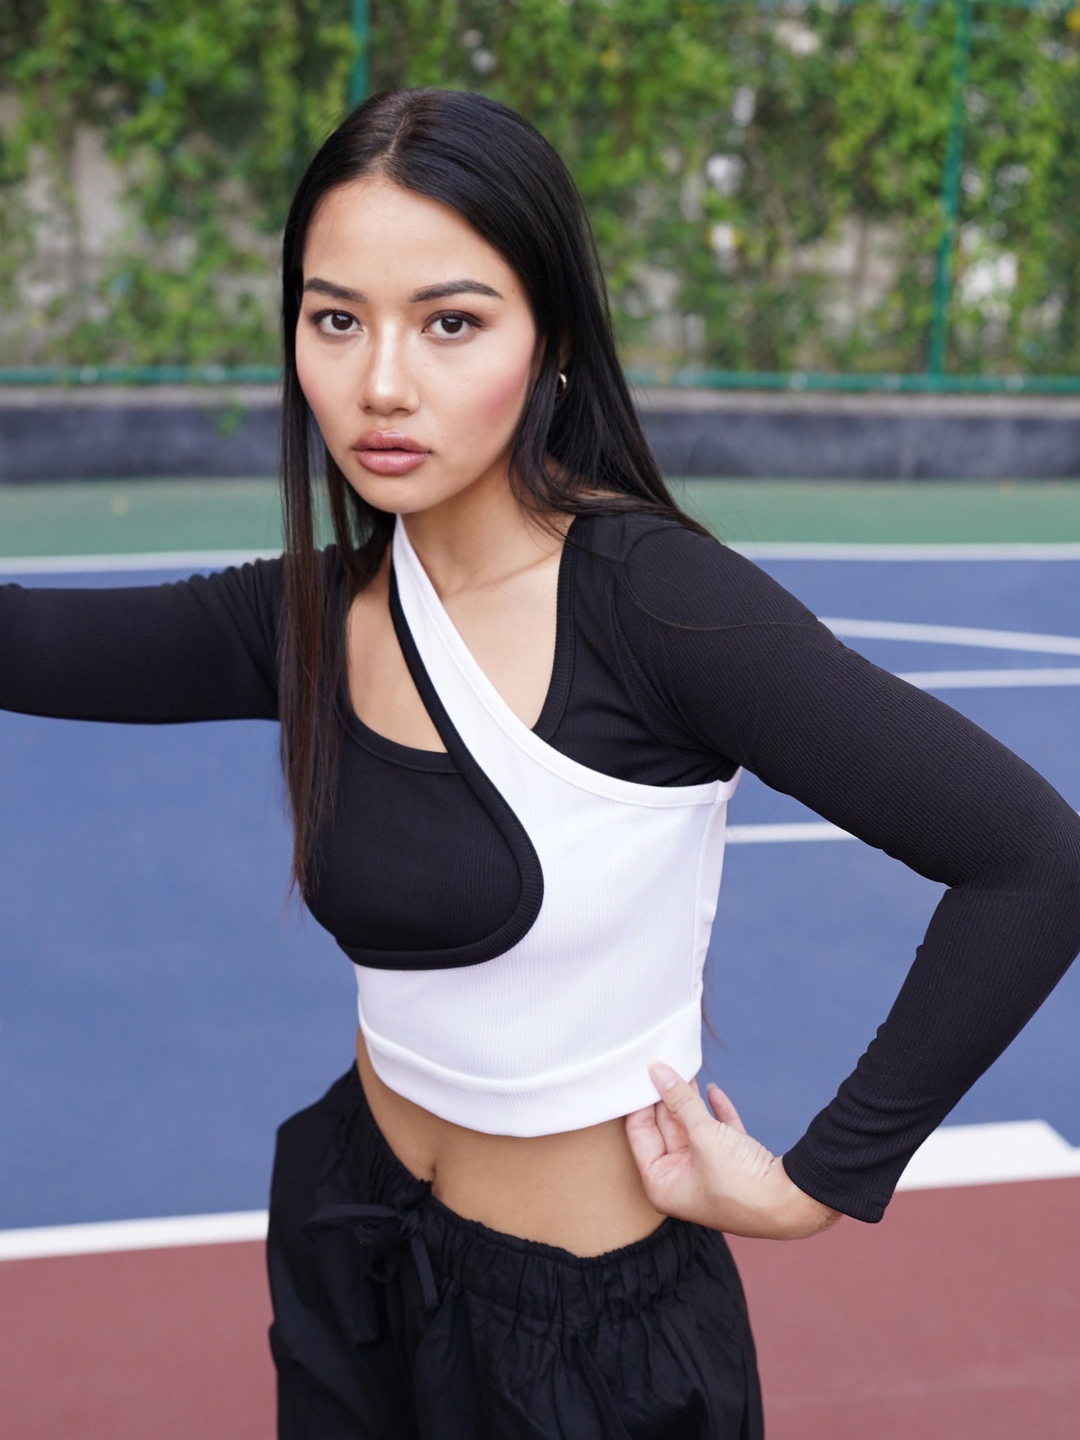 Stretchable Dual-Ribbed Top - Uptownie